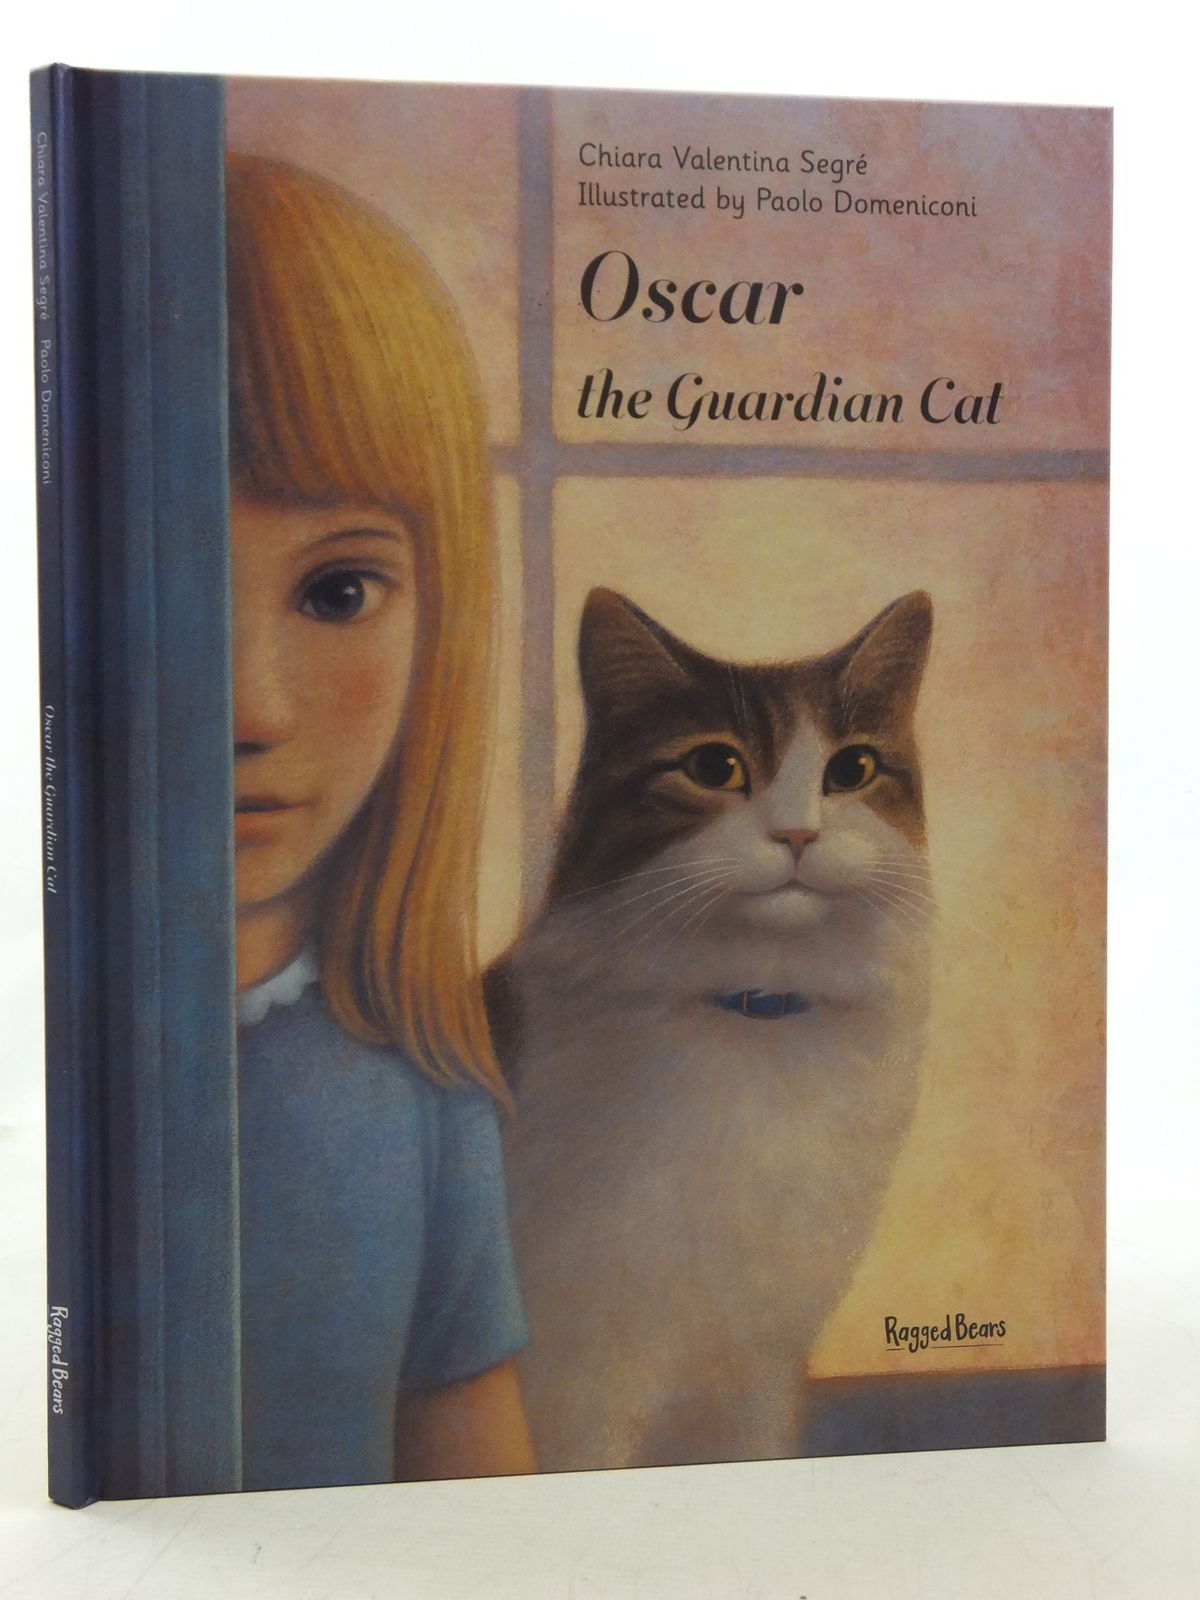 Photo of OSCAR THE GUARDIAN CAT written by Segre, Chiara Valentina illustrated by Domeniconi, Paolo published by Ragged Bears Limited (STOCK CODE: 2117940)  for sale by Stella & Rose's Books